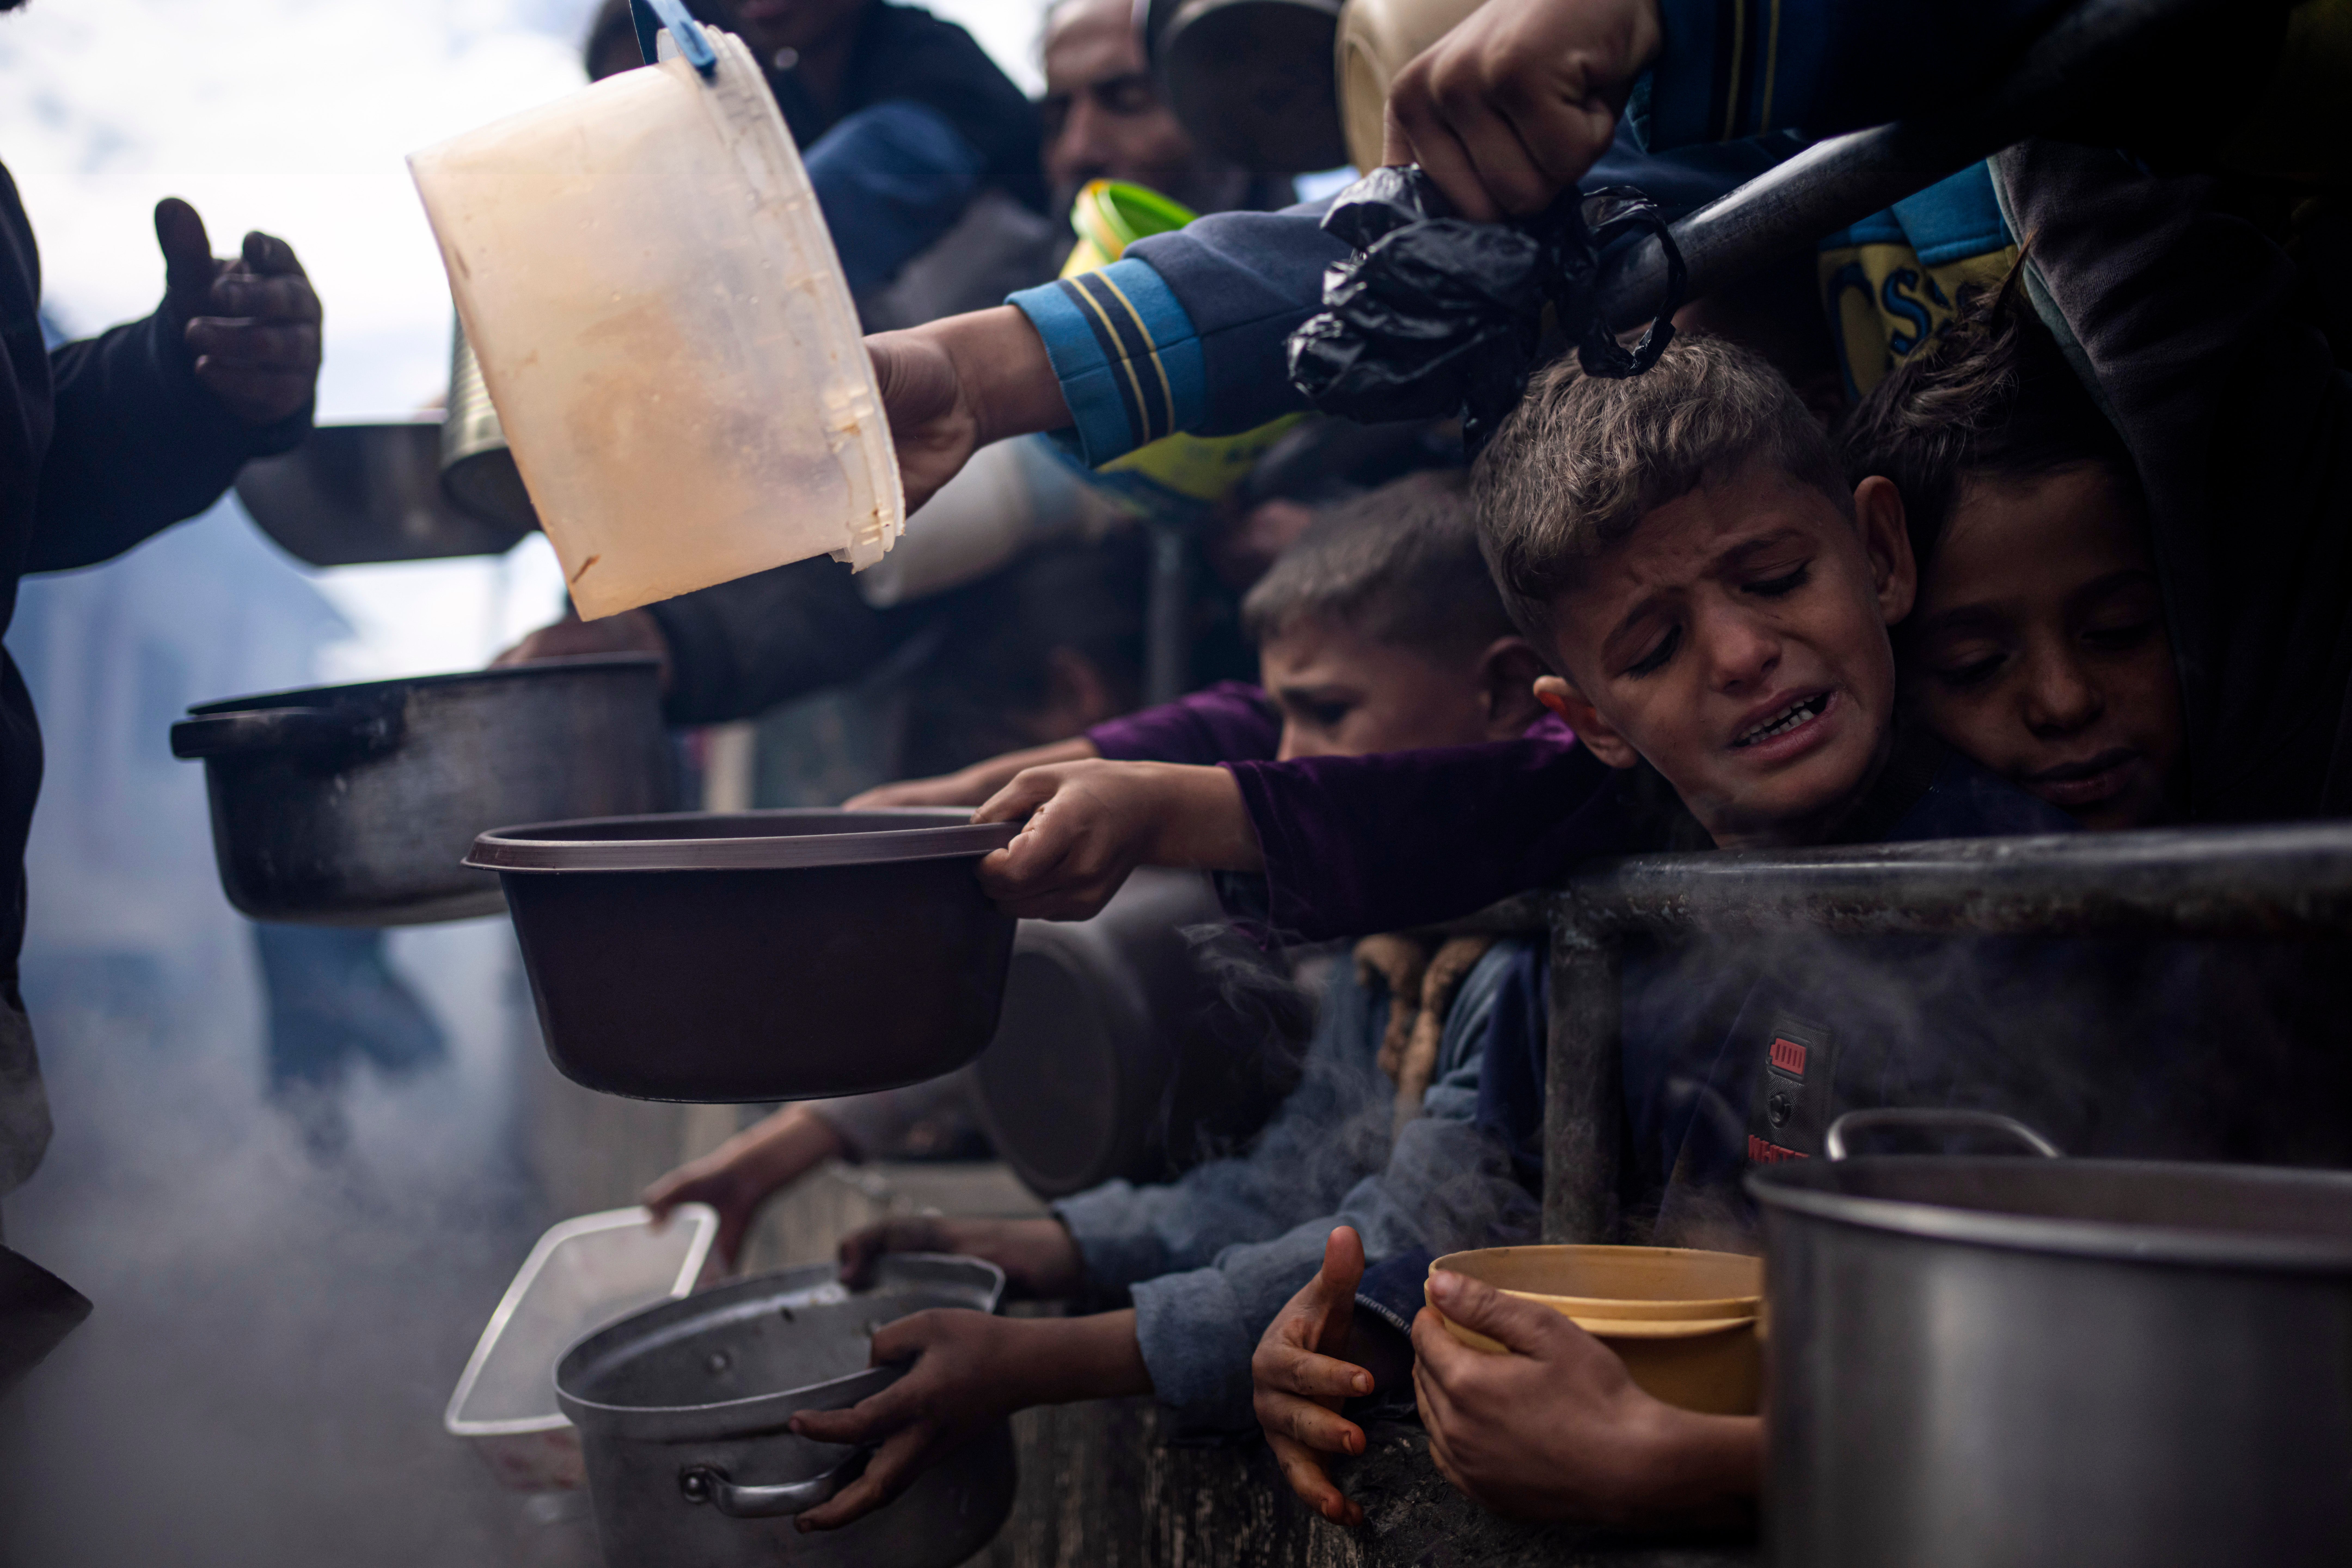 Palestinians line up for a meal in Rafah, Gaza Strip, in February. The region is facing acute hunger and is on the brink of famine as the Israeli siege continues